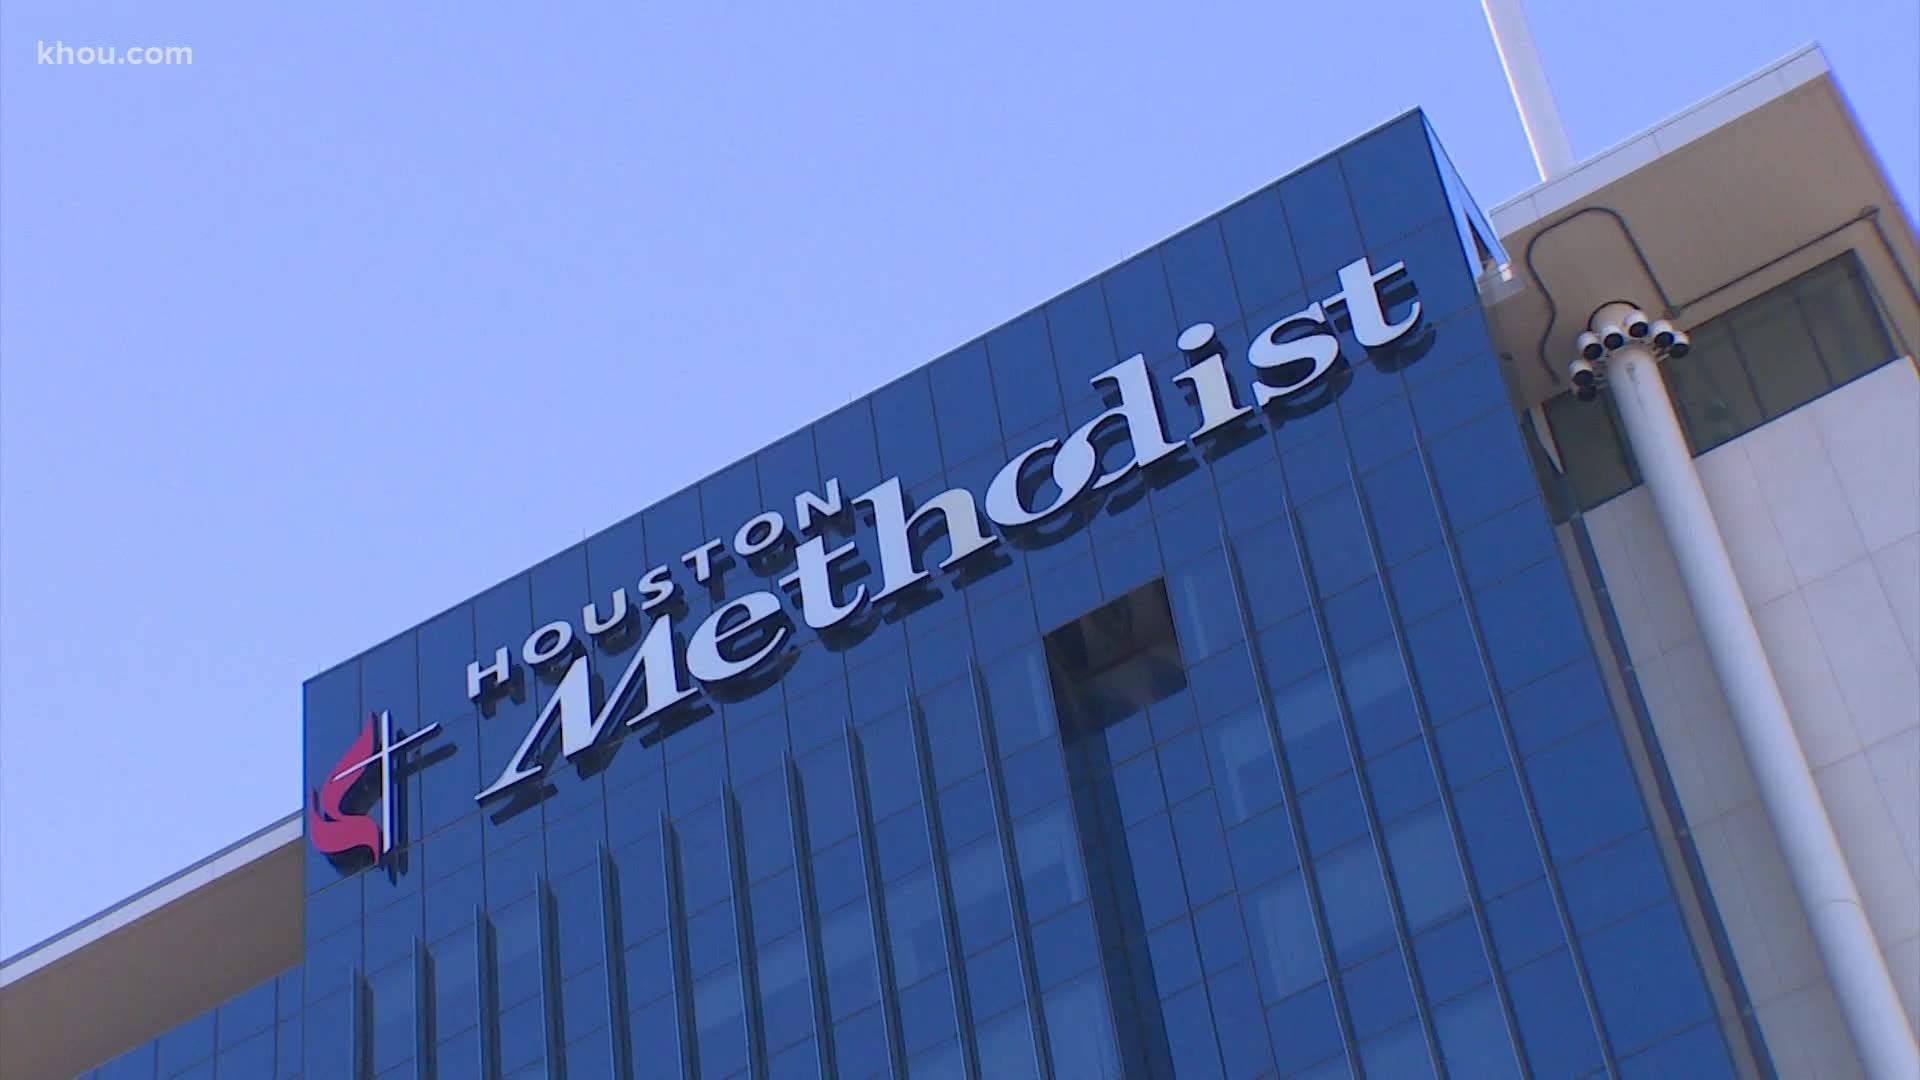 Houston Methodist CEO Dr. Marc Boom weighs in on Texas' reopening process after Gov. Abbott launches the next phase.